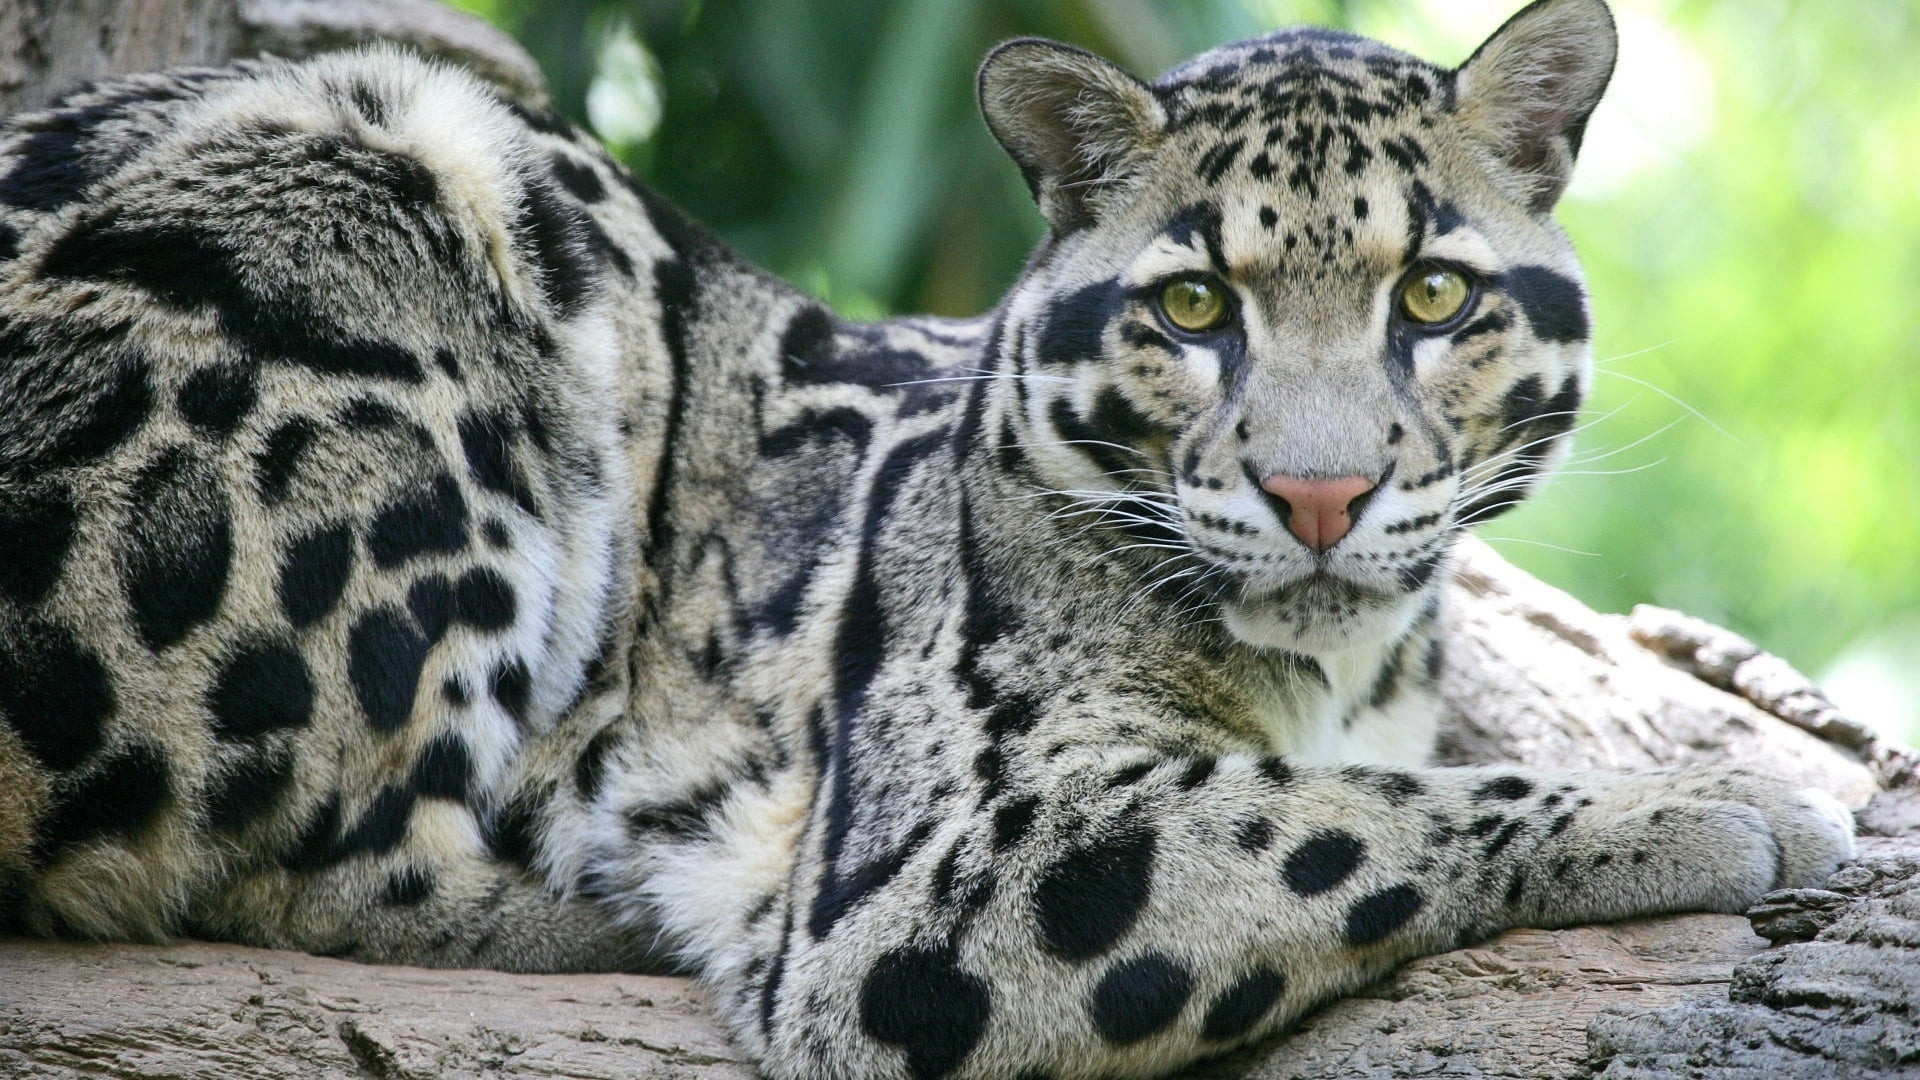 Fun Facts About Clouded Leopards